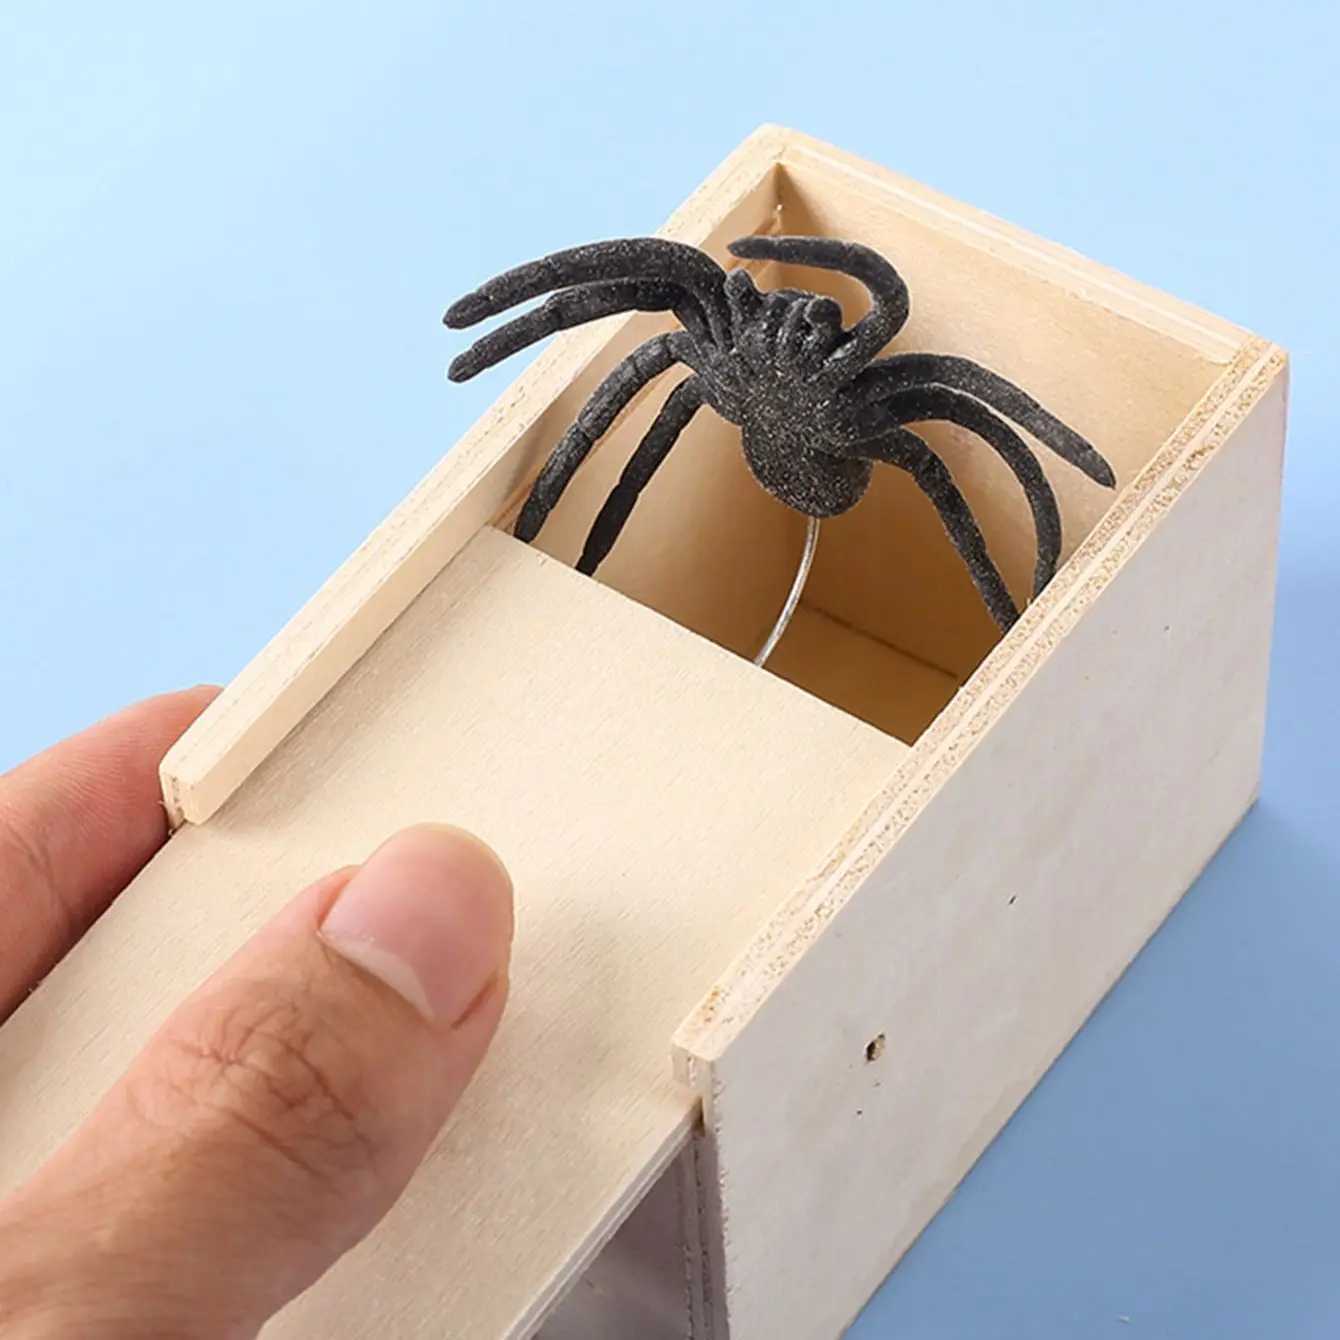 Decompression Toy -Wooden Prank Trick Practical Joke Home Office Scare Toy Box Gag Spider Parents Friend Funny Play Joke Gift Surprising Bo d240424